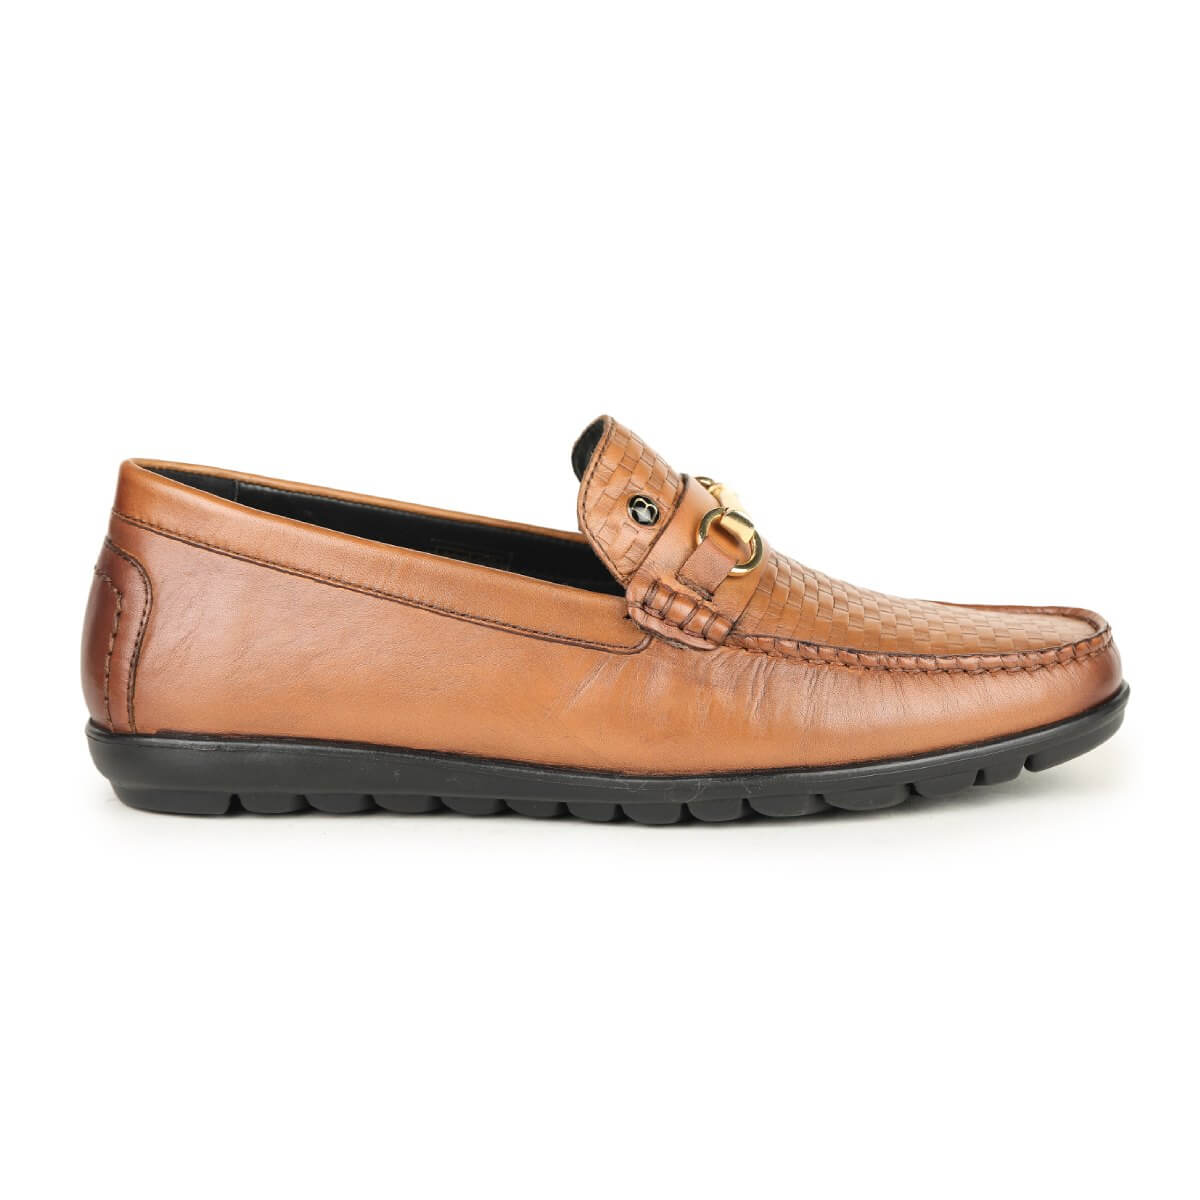 Mat Style Loafers For Men_tan2